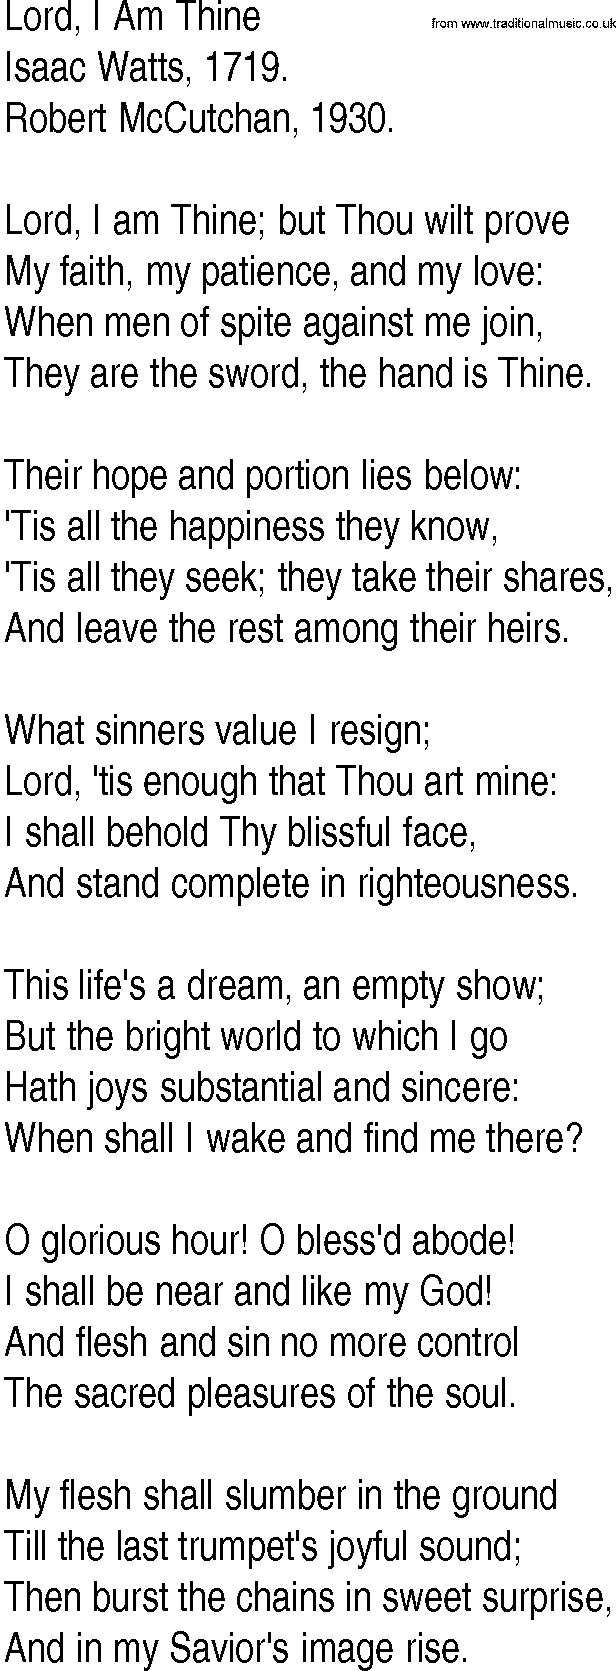 Hymn and Gospel Song: Lord, I Am Thine by Isaac Watts lyrics